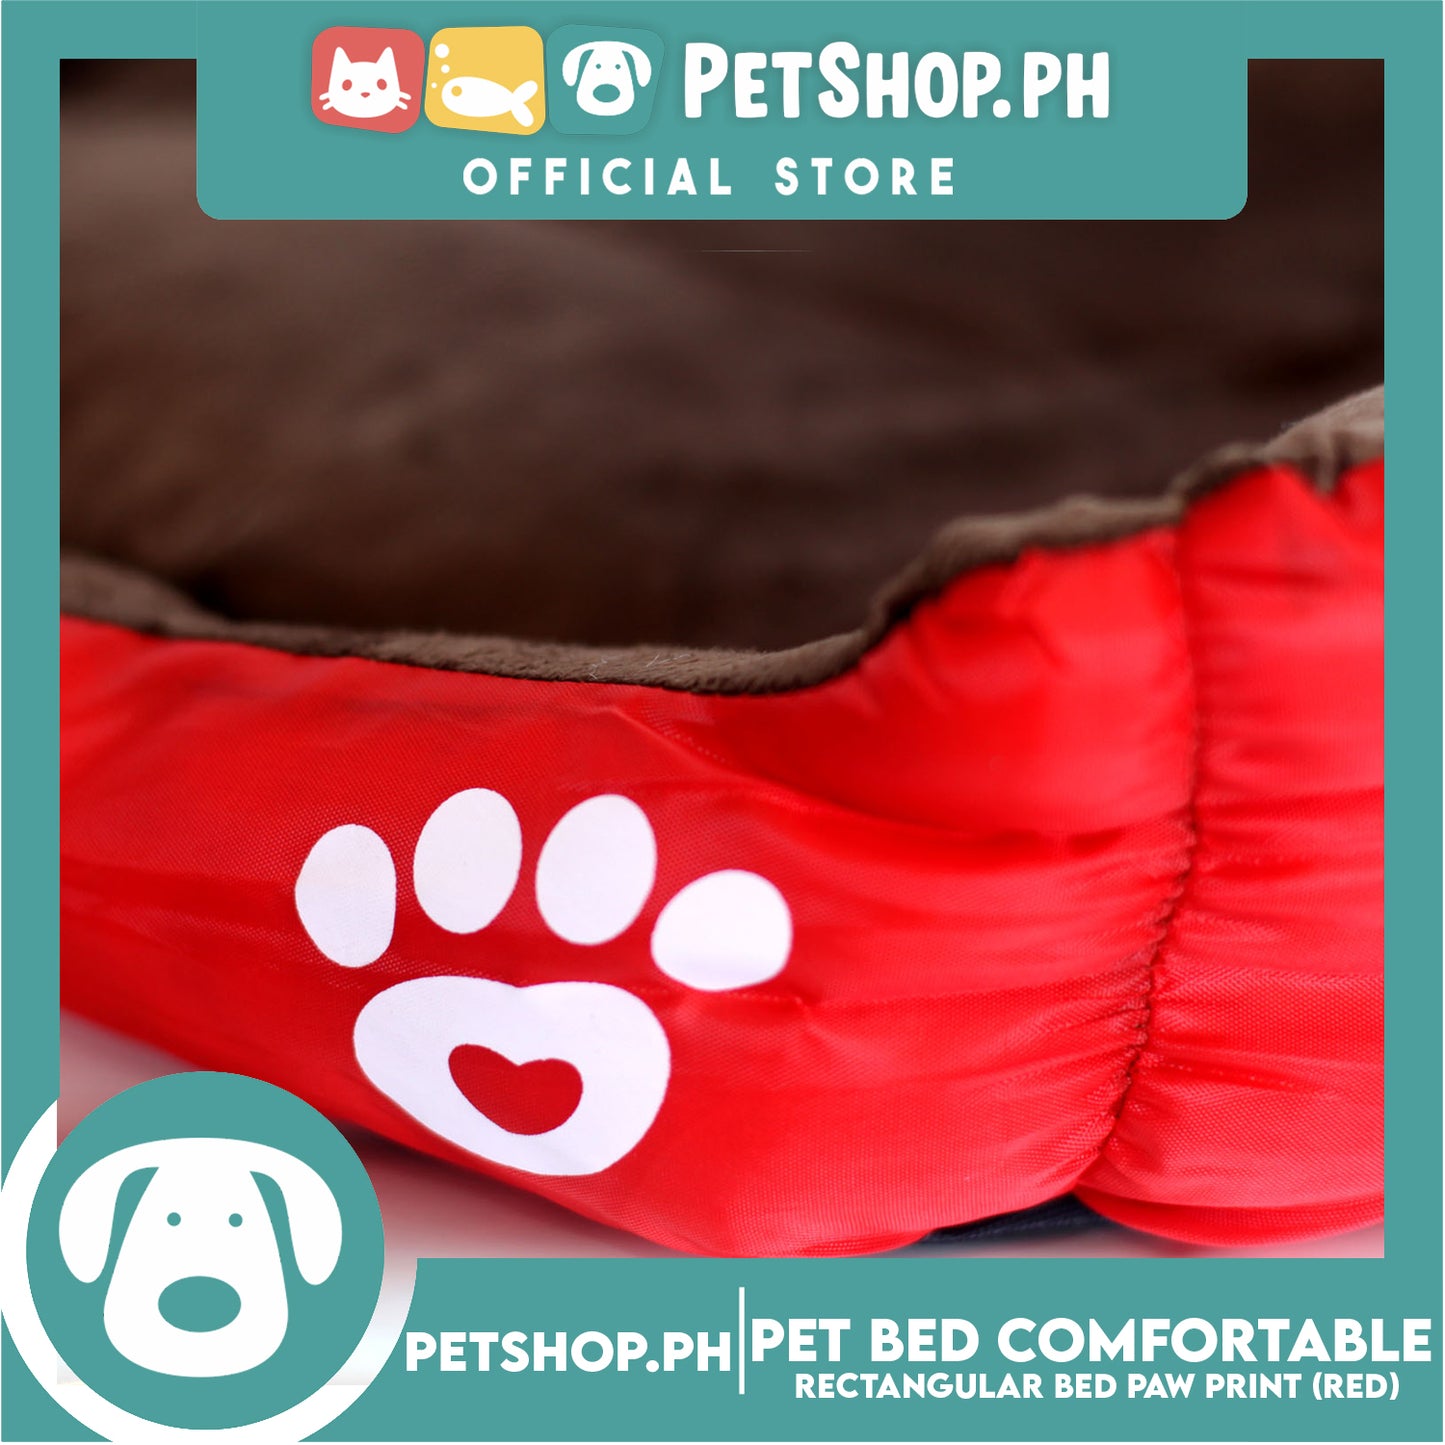 Pet Bed Comfortable Rectangular Ped Bet with Paw Print 72x58x10cm Large for Dogs & Cats (Red)